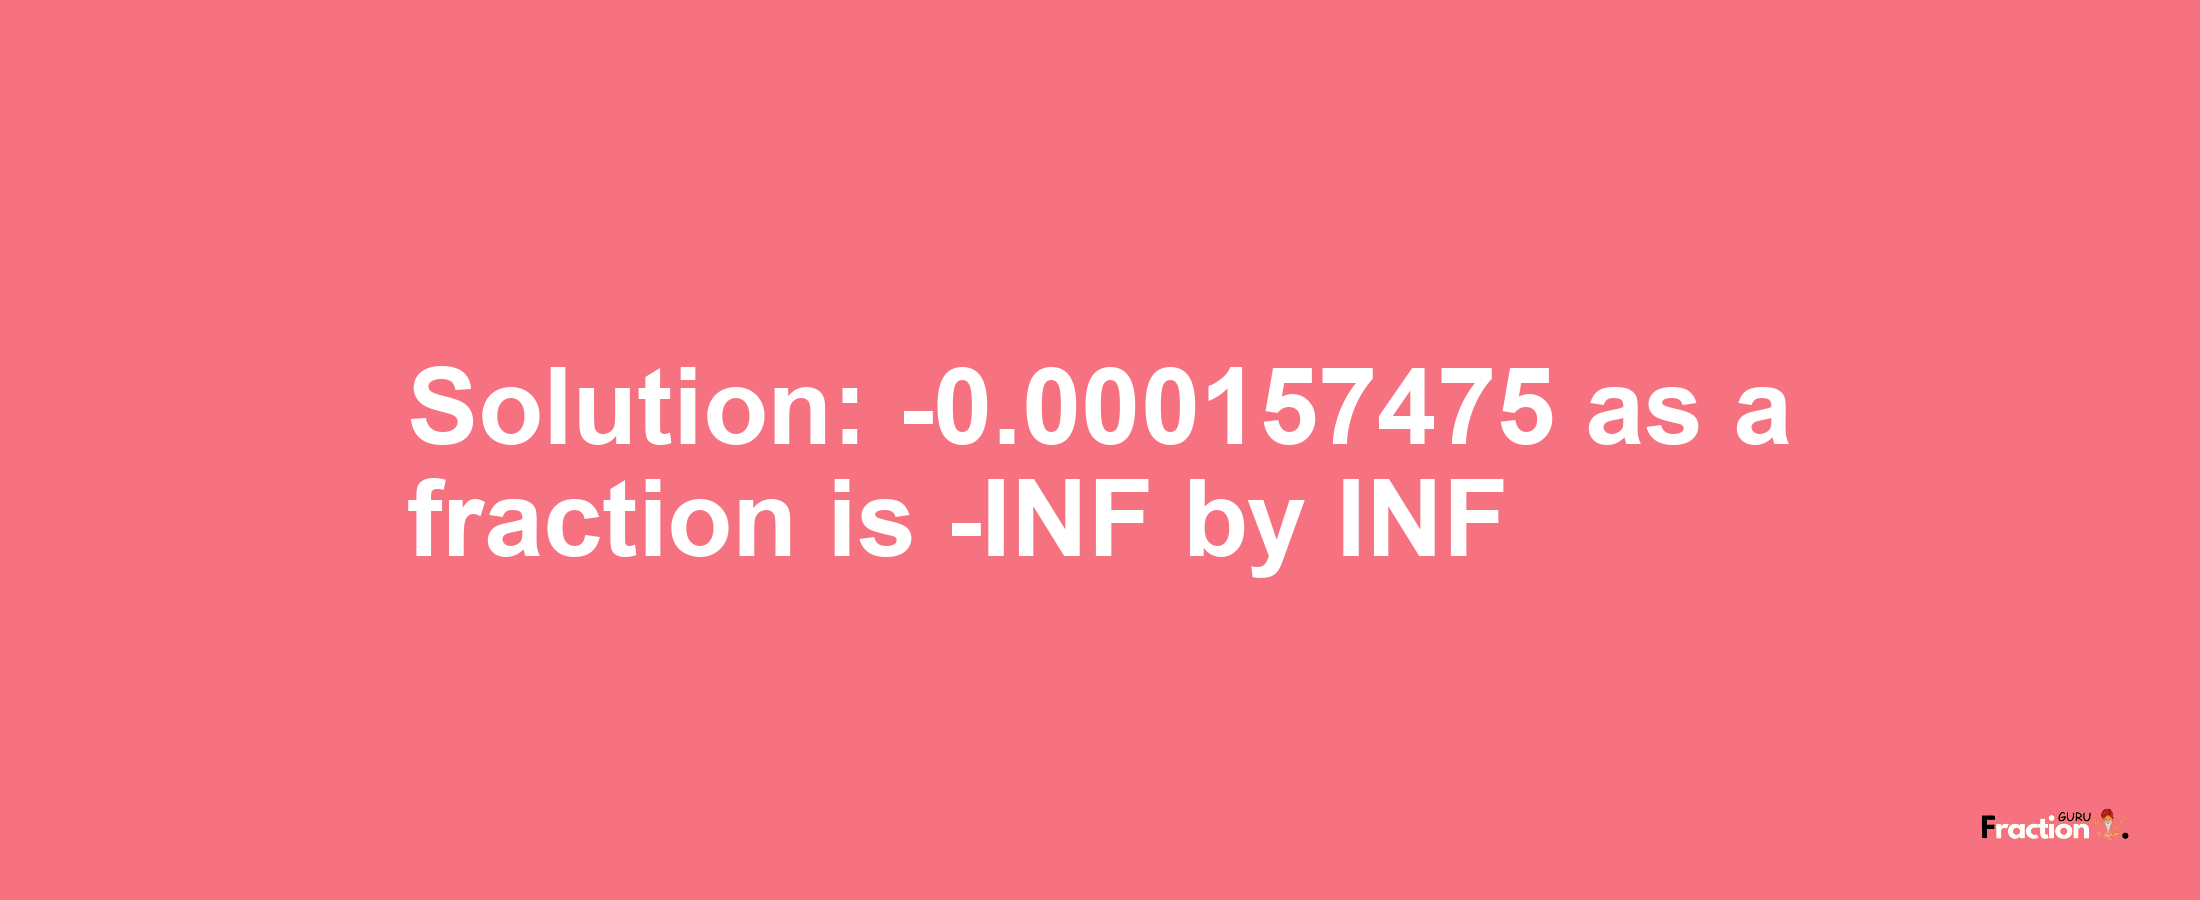 Solution:-0.000157475 as a fraction is -INF/INF